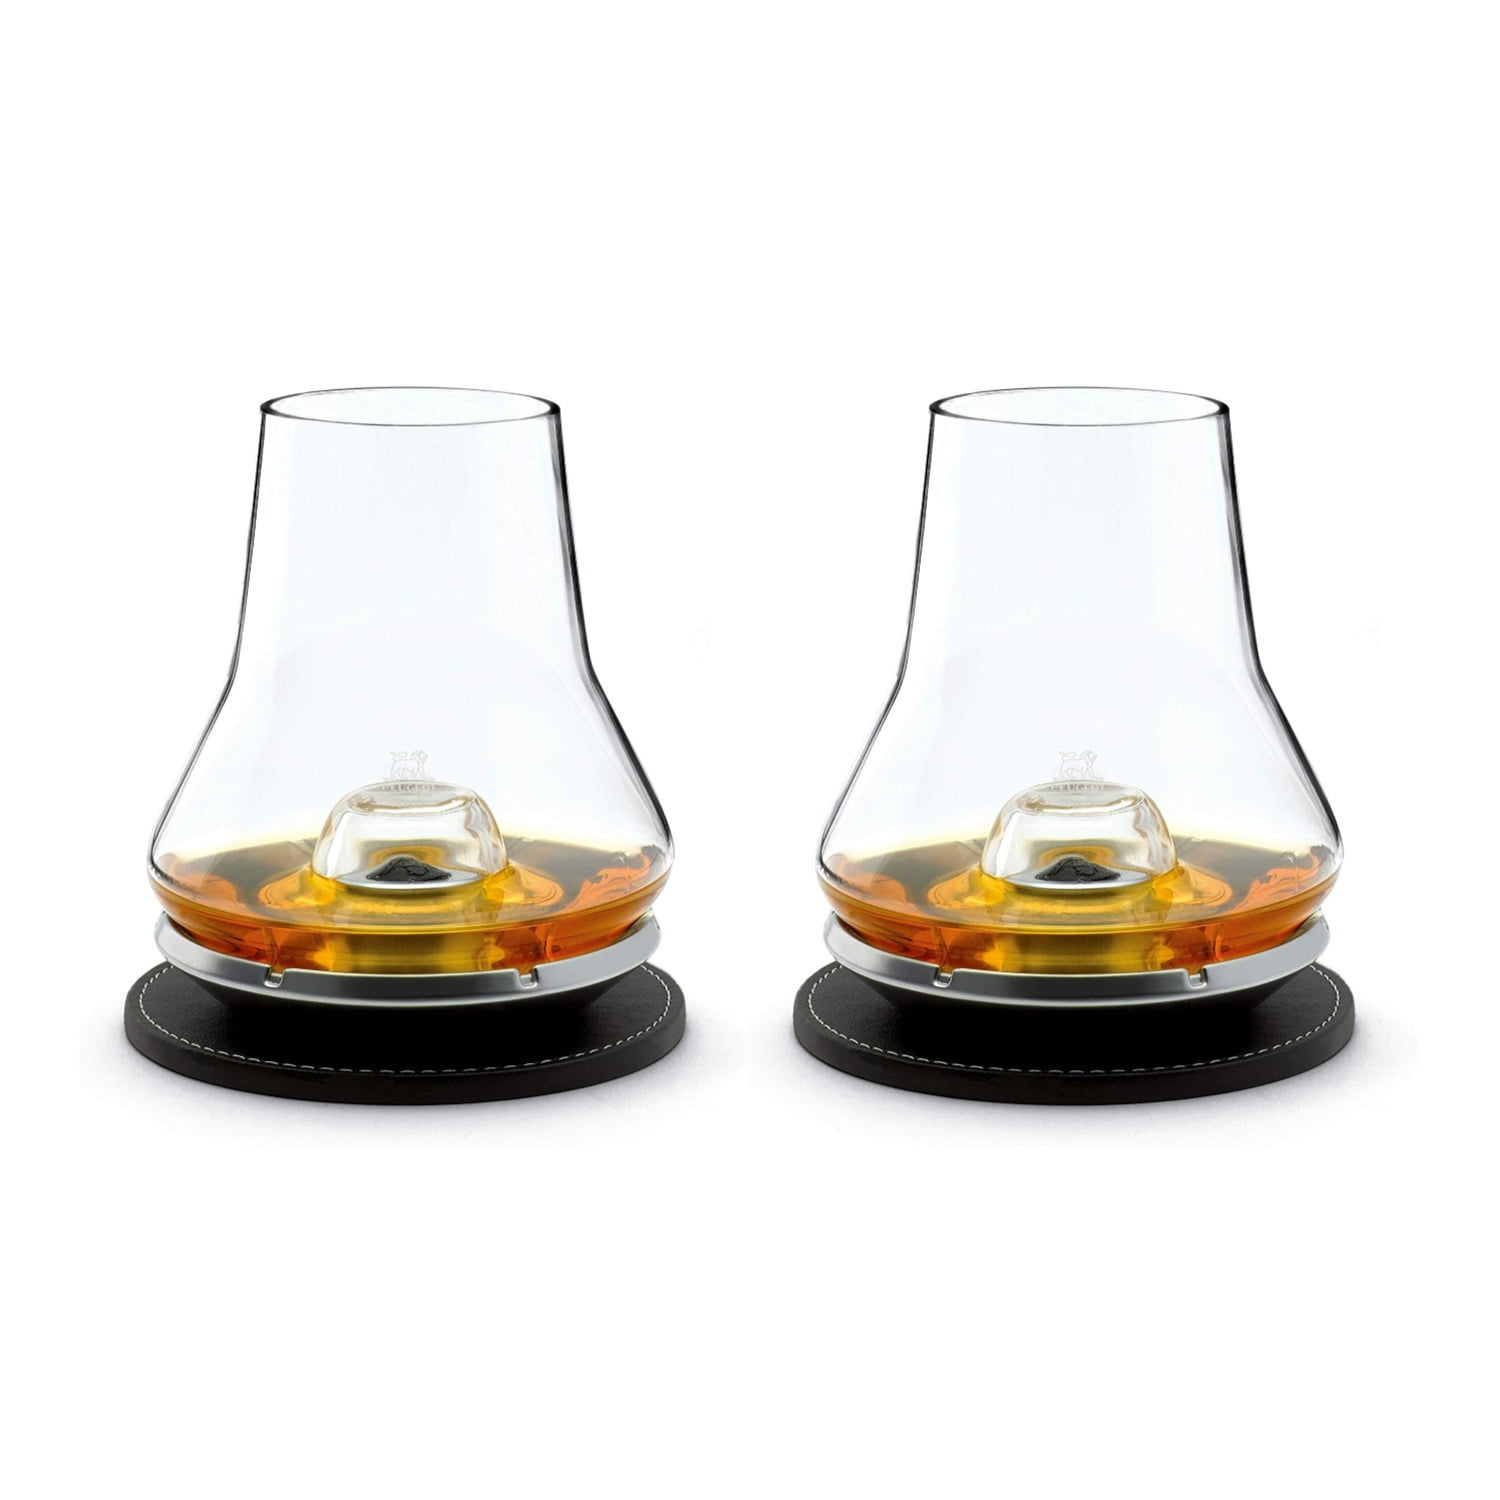 Peugeot Impitoyable Whisky Tasting Set. Includes Cordial Glass and